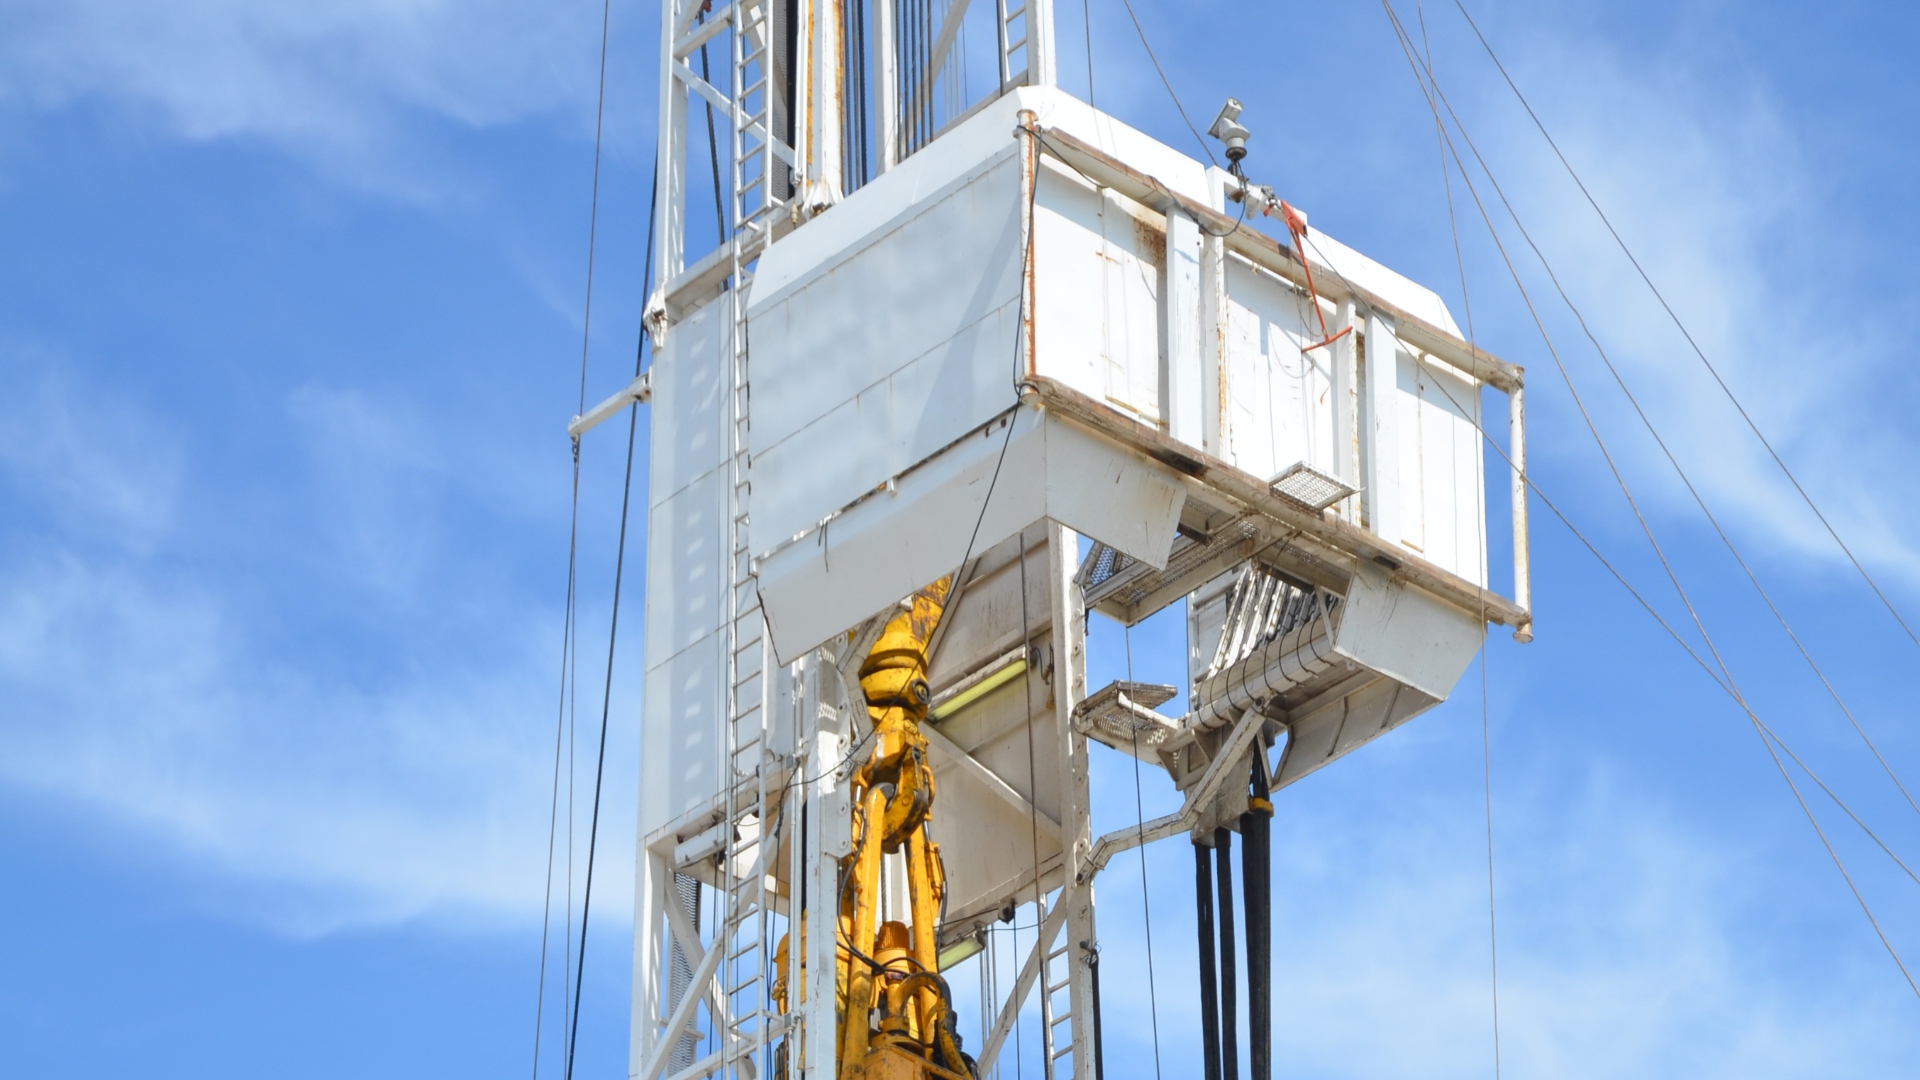 Greka Drilling Ltd has secured a US$2.5m loan through a related party transaction